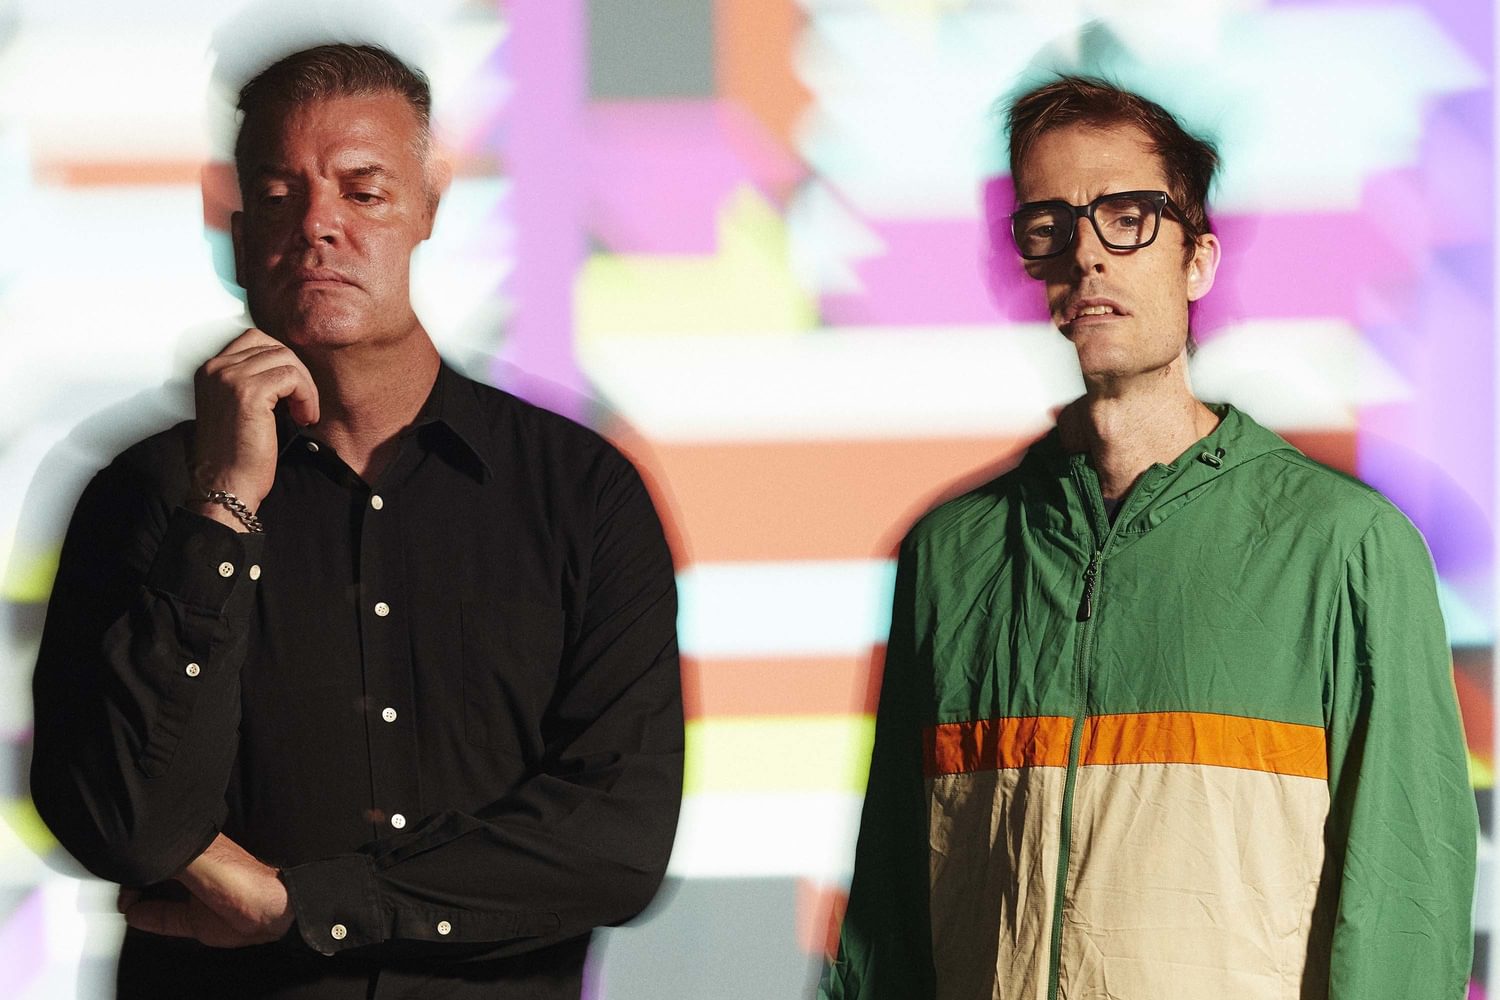 Battles experiment with some interesting modes of transport in ‘Fort Greene Park’ video